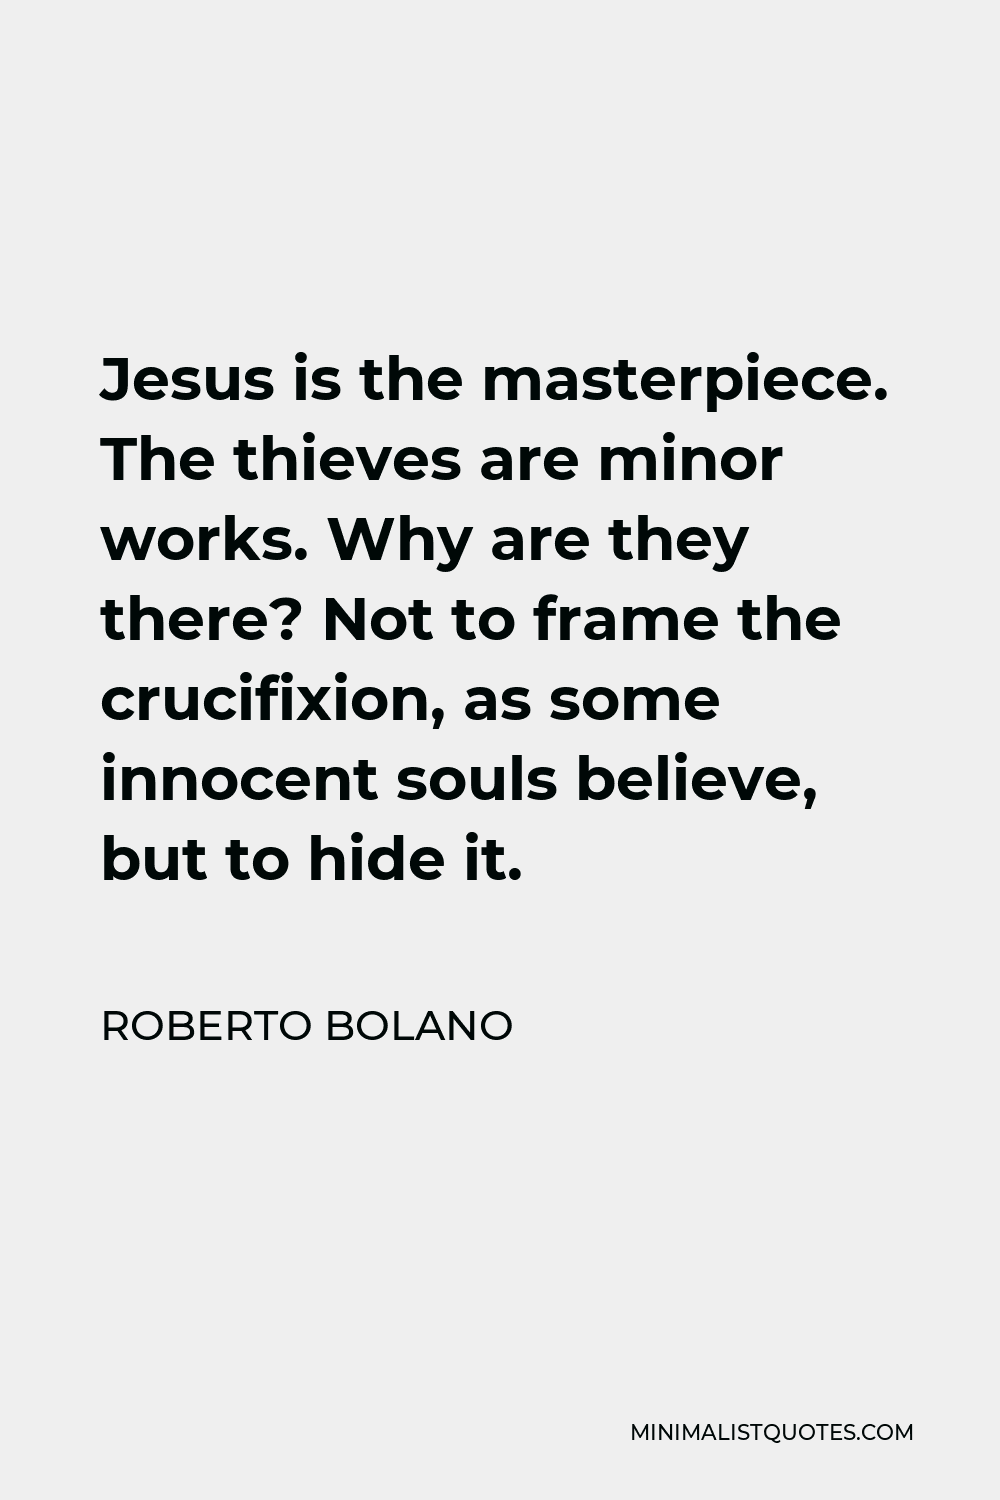 Roberto Bolano Quote - Jesus is the masterpiece. The thieves are minor works. Why are they there? Not to frame the crucifixion, as some innocent souls believe, but to hide it.